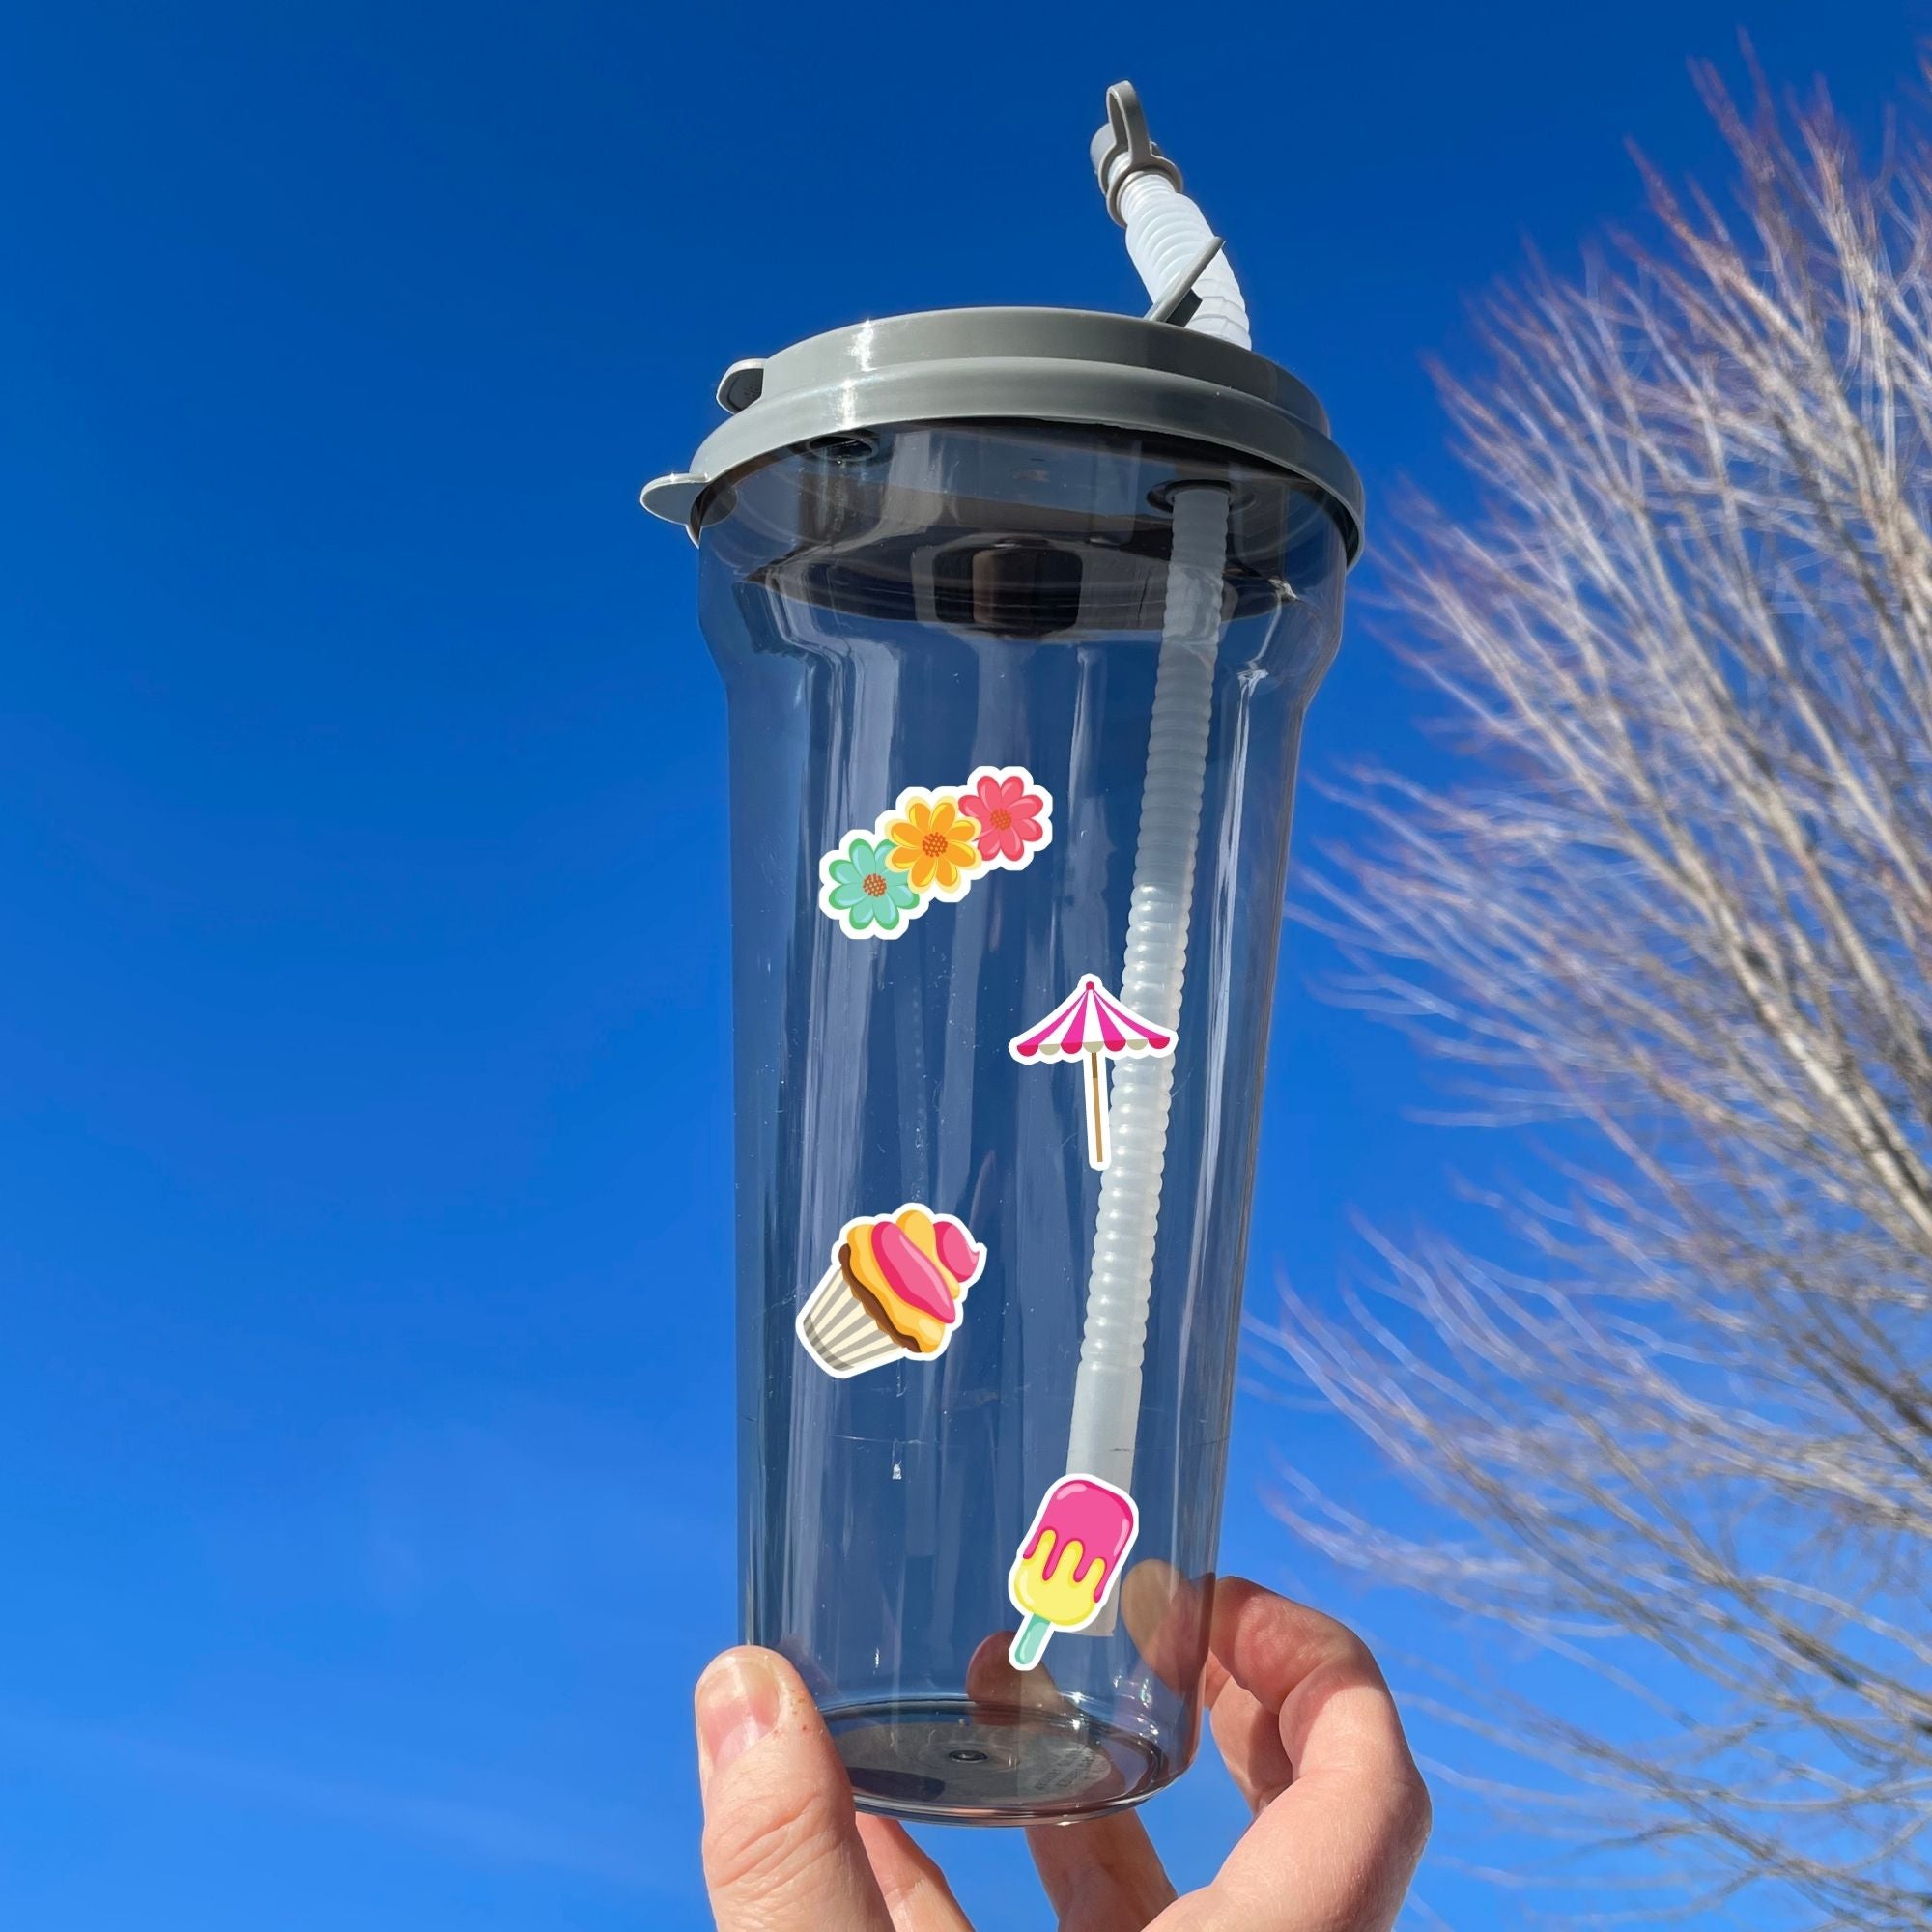 This image shows a water bottle with some of the Picnic stickers applied.